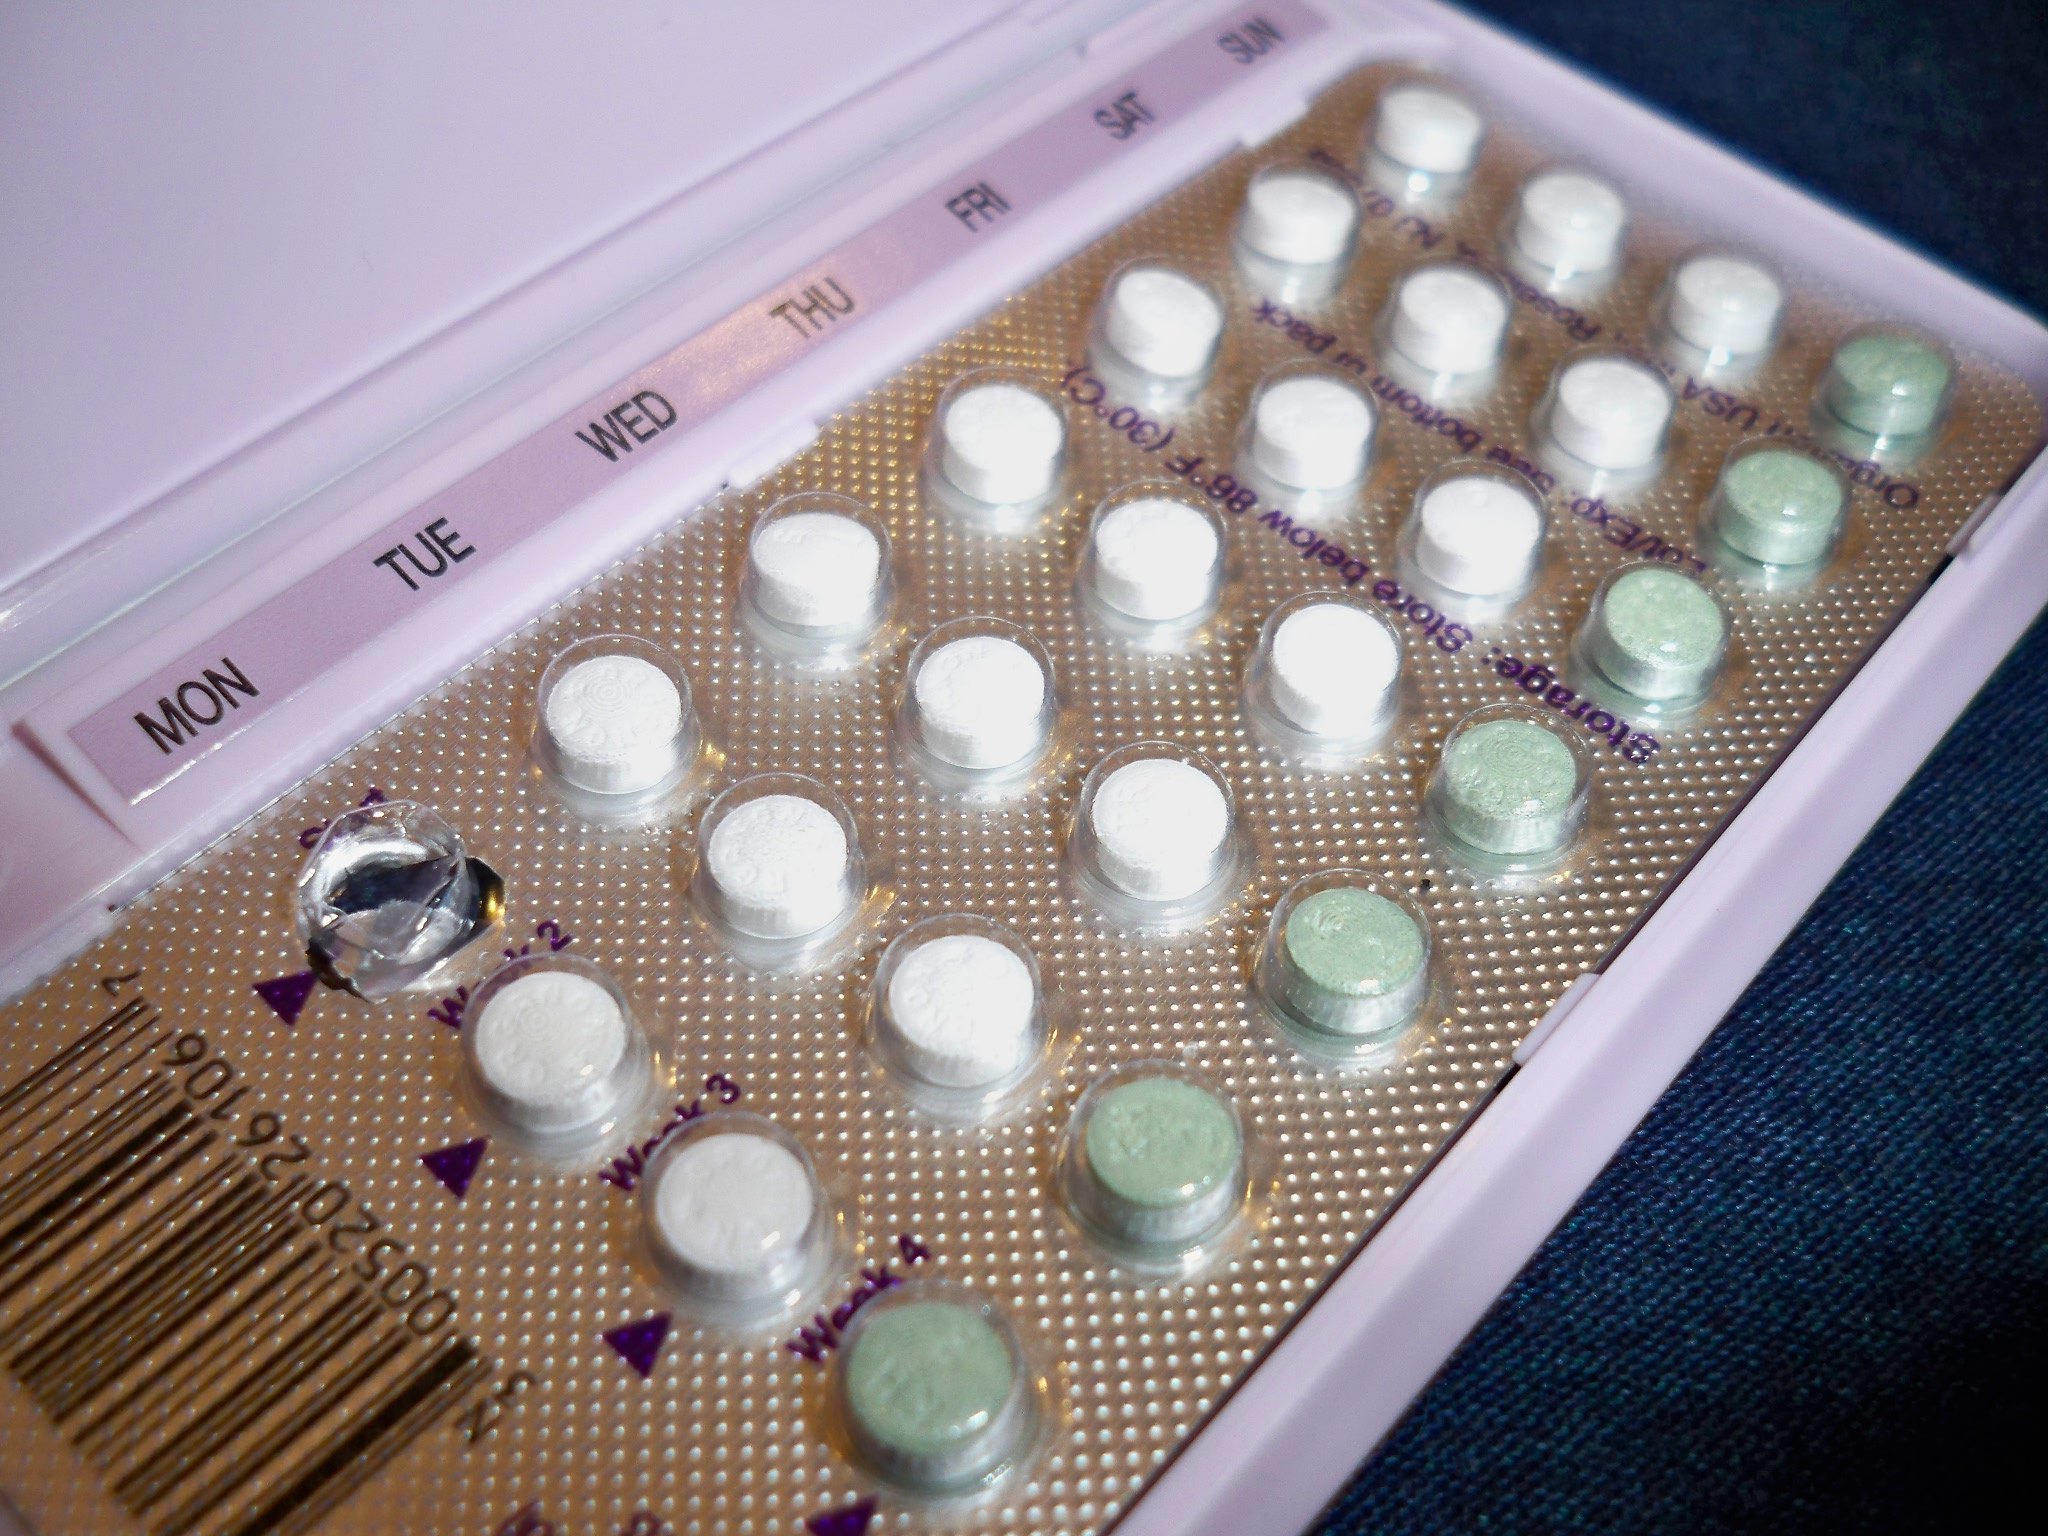 A pack of birth control pills